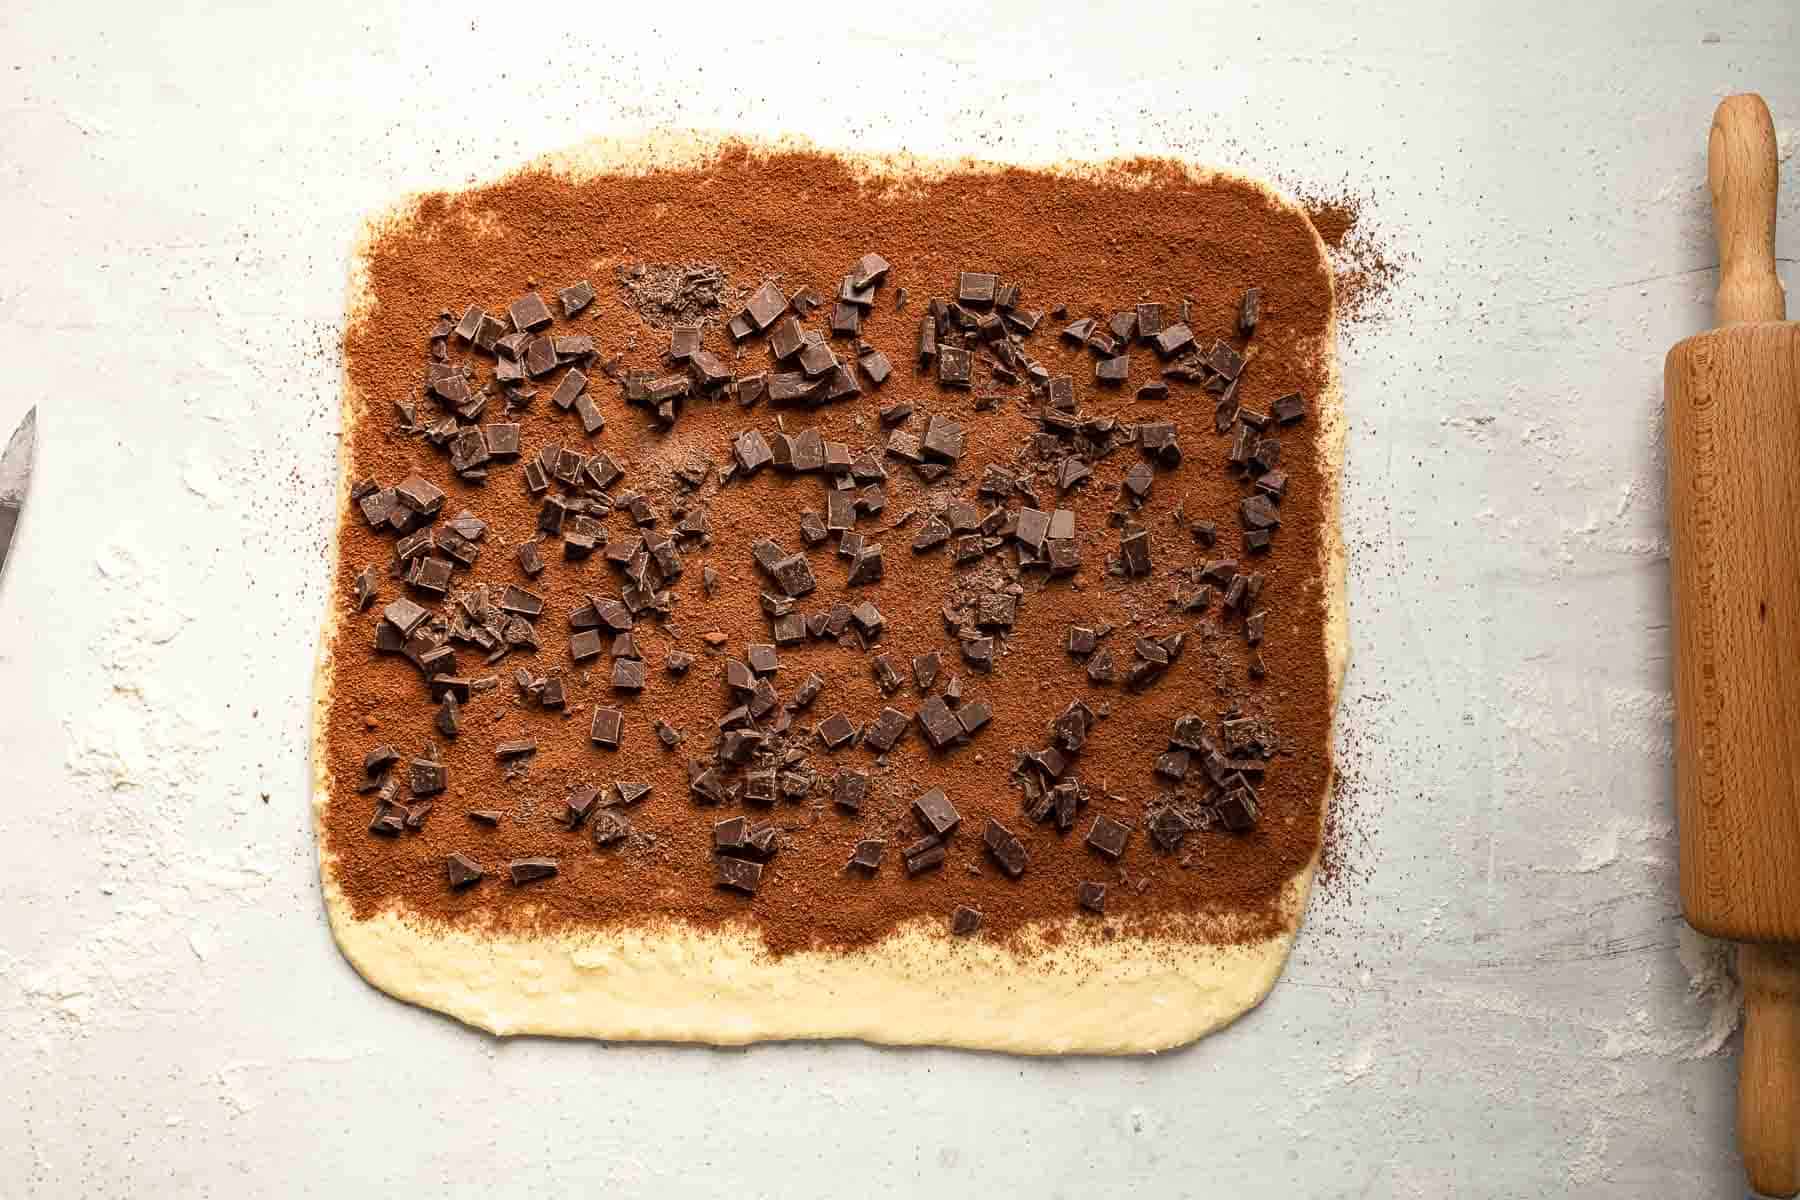 dough with chocolate and cinnamon sprinkled on it